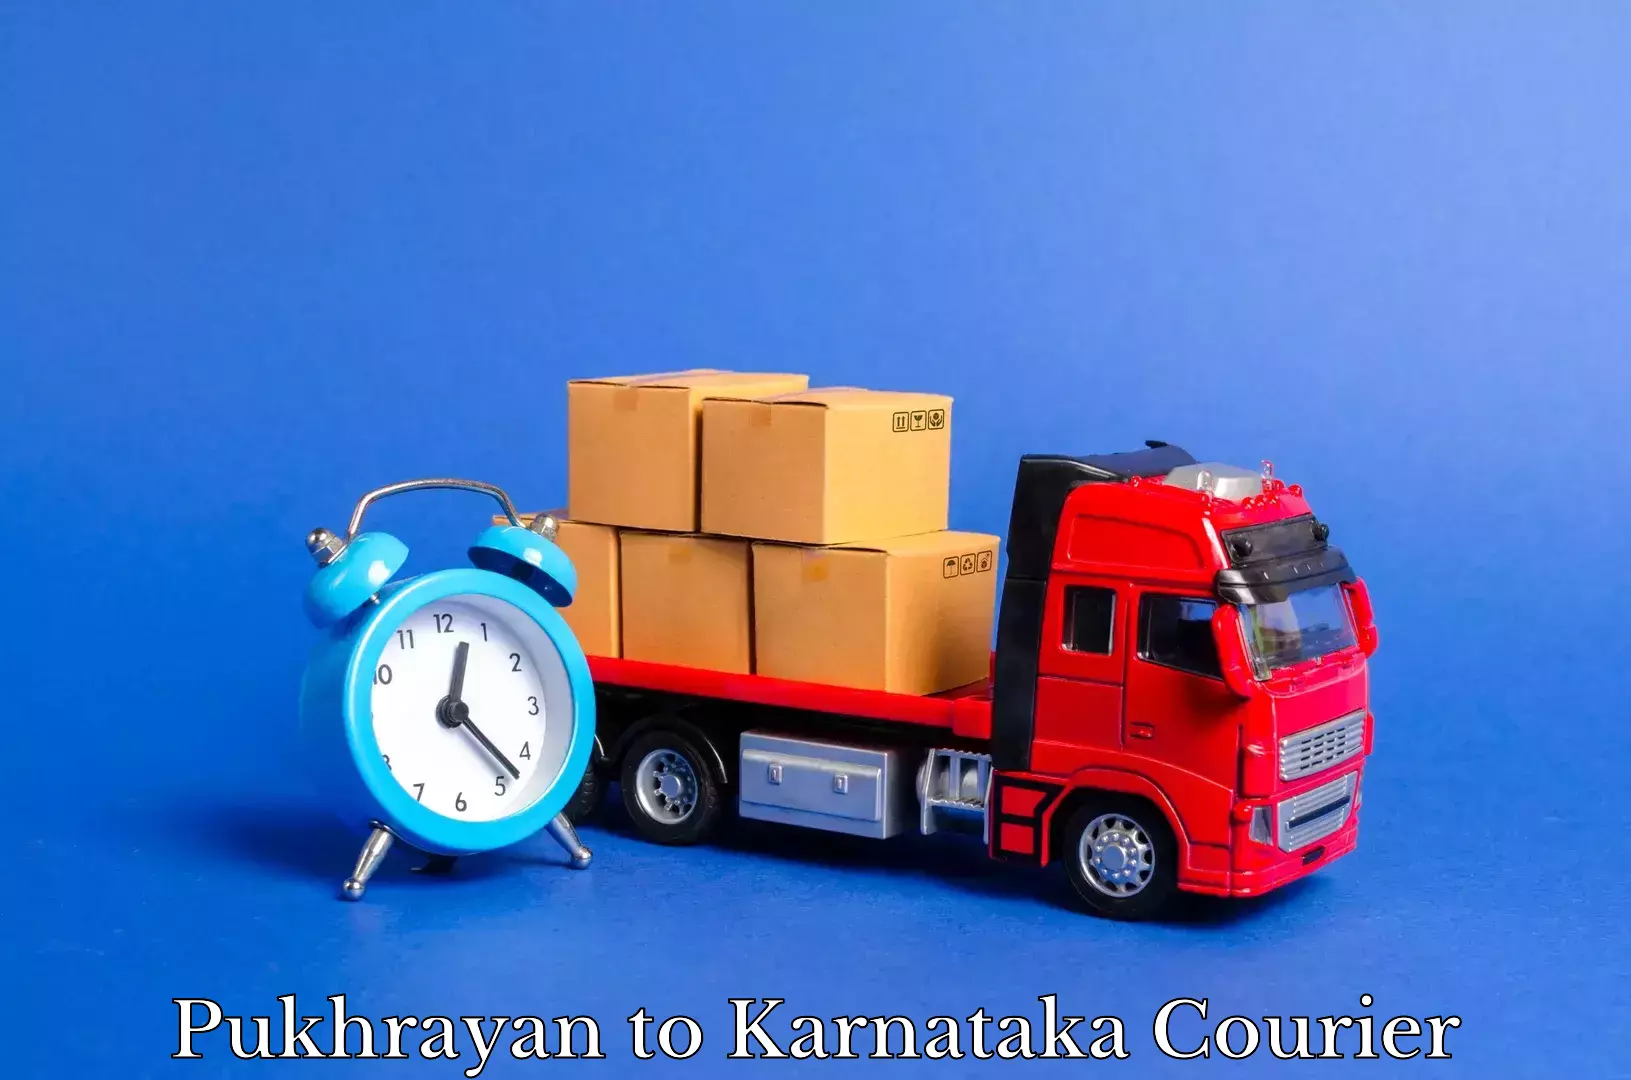 Professional movers in Pukhrayan to Mudhol